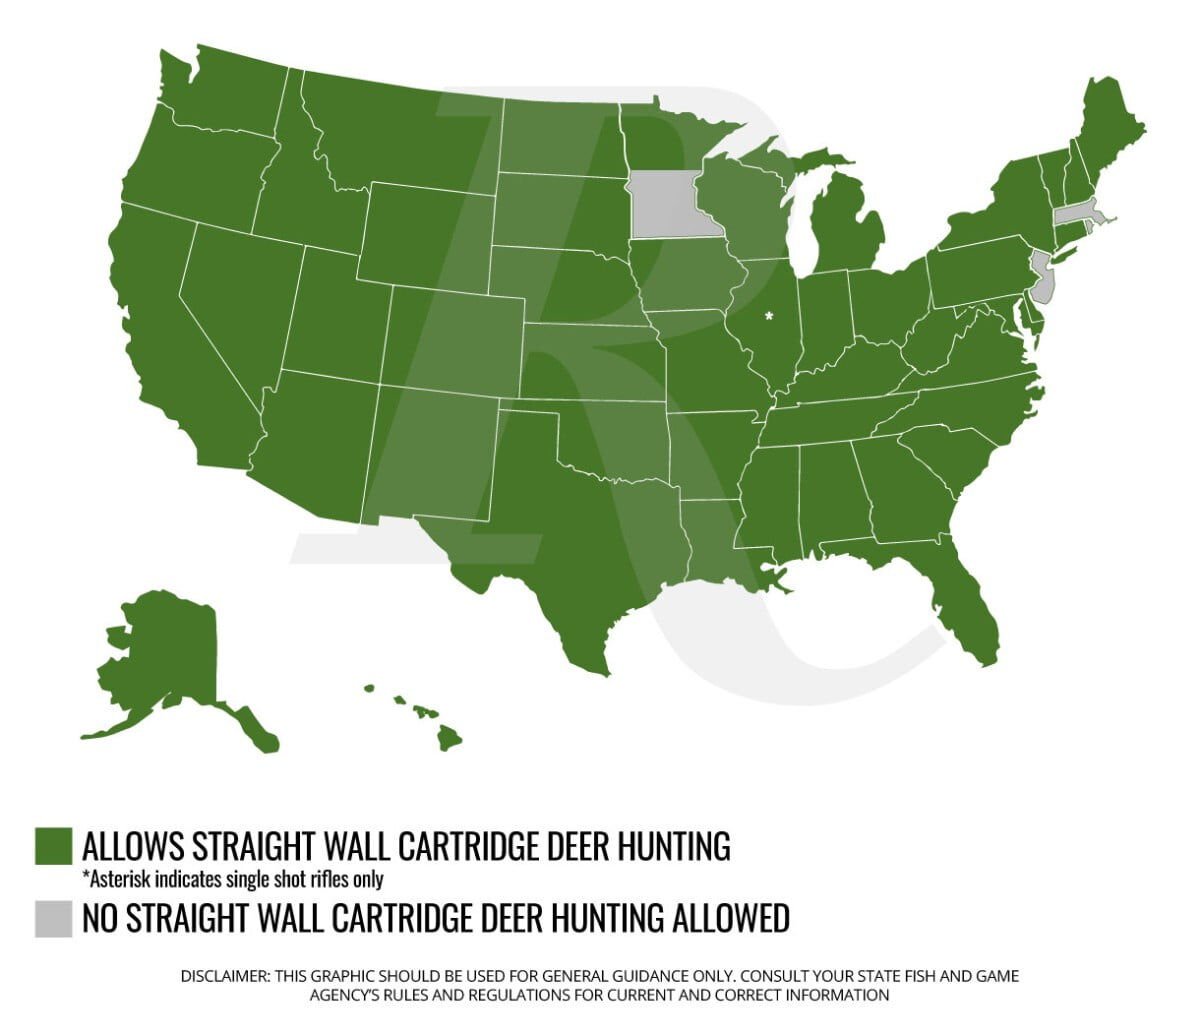 List of states that allow straight wall cartridge during rifle hunting deer seasons as of January 3, 2023